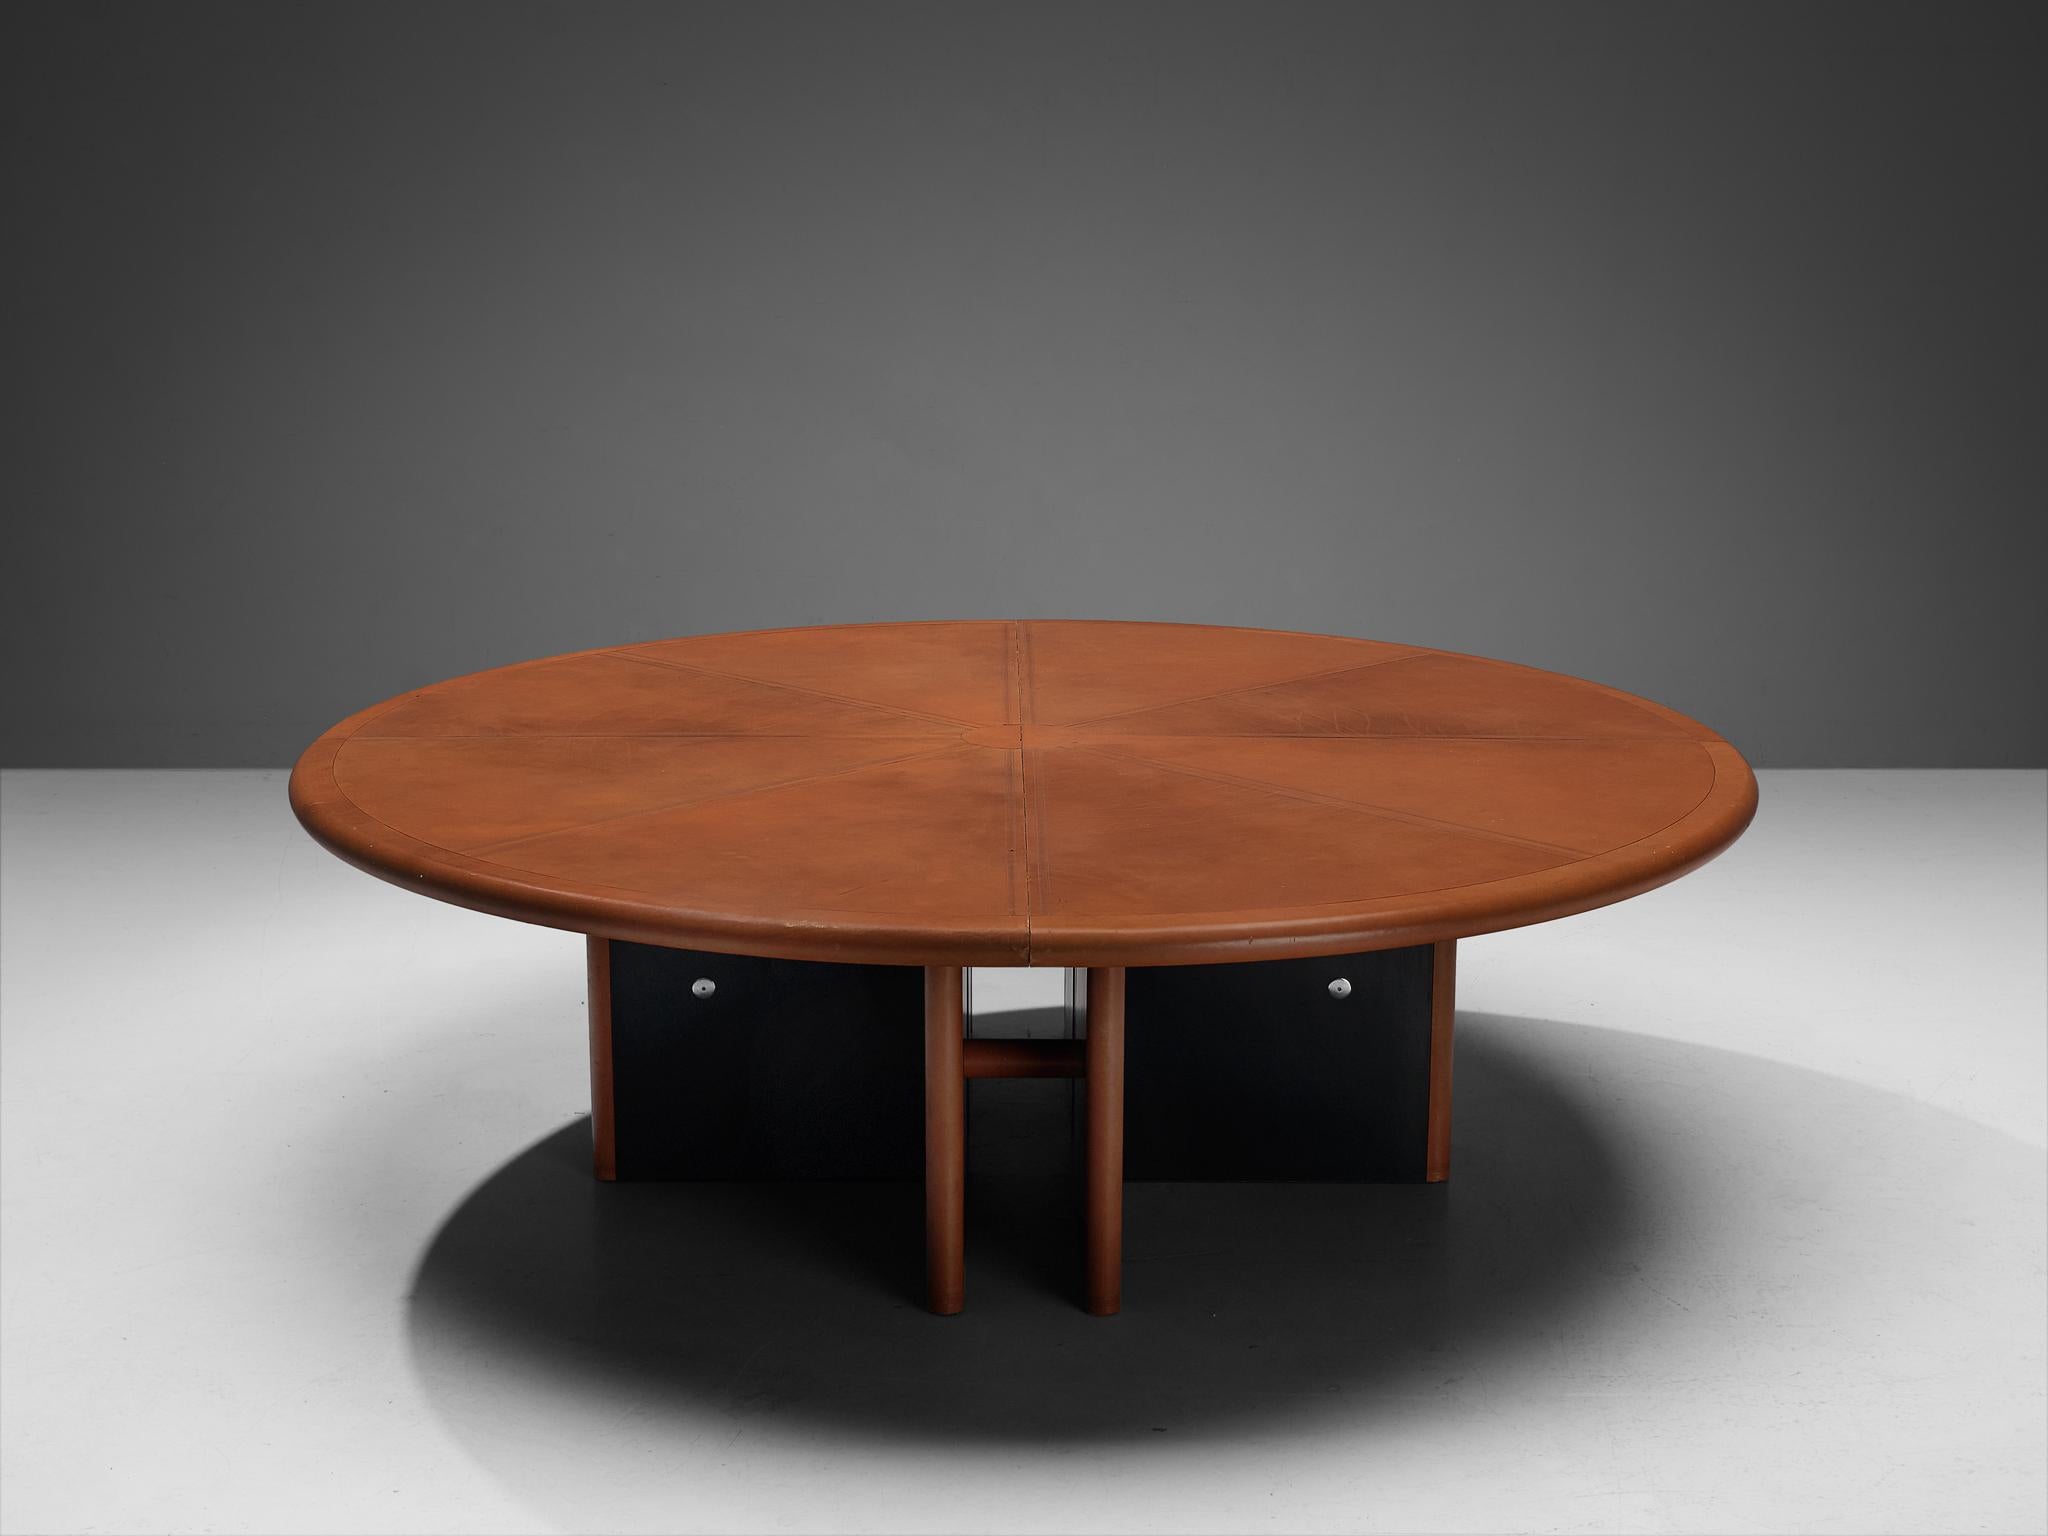 Guido Faleschini for i4 Mariani, dining or conference table, leather, wood, metal, Italy, 1970s 

This massive round dining table is designed by the creative Italian designer Guido Faleschini for Italian furniture company I4 Mariani. This piece of